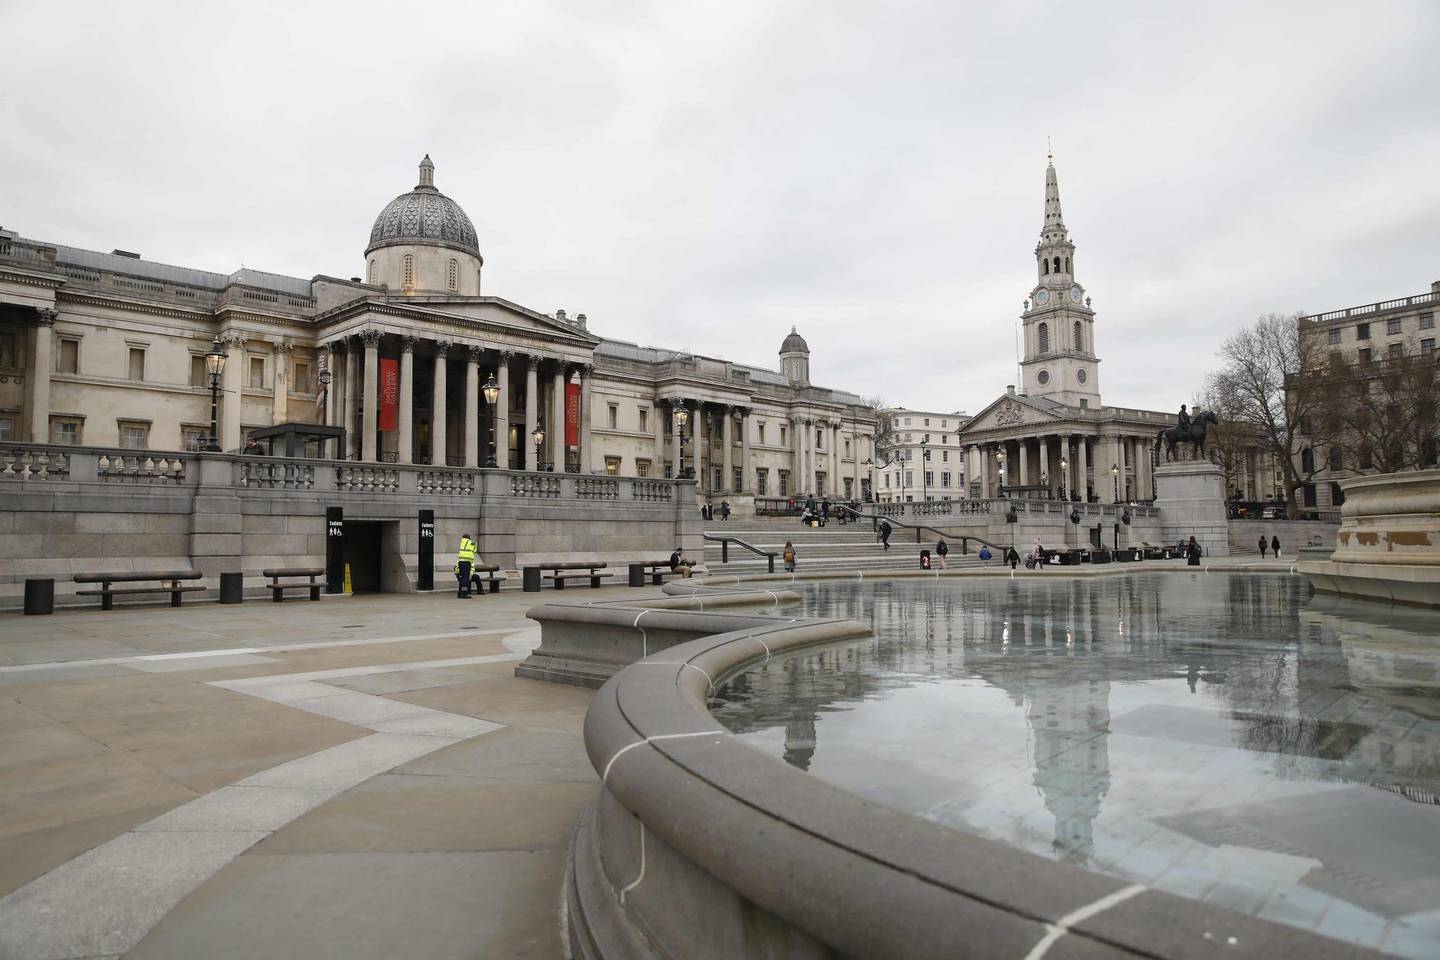 Pedestrians walk in front of the National Gallery in Trafalgar Square in central London on March 17, 2020. - Britain on Tuesday ramped up its response to the escalating coronavirus outbreak after the government imposed unprecedented peacetime measures prompted by scientific advice that infections and deaths would spiral without drastic action. As a result of the outbreak, all events in London's Trafalgar Square, including upcoming celebrations for St George's Day, Vaisakhi and Eid, were cancelled until further notice, and the National Portrait Gallery will also close its doors until further notice from March 18. (Photo by Tolga AKMEN / AFP)